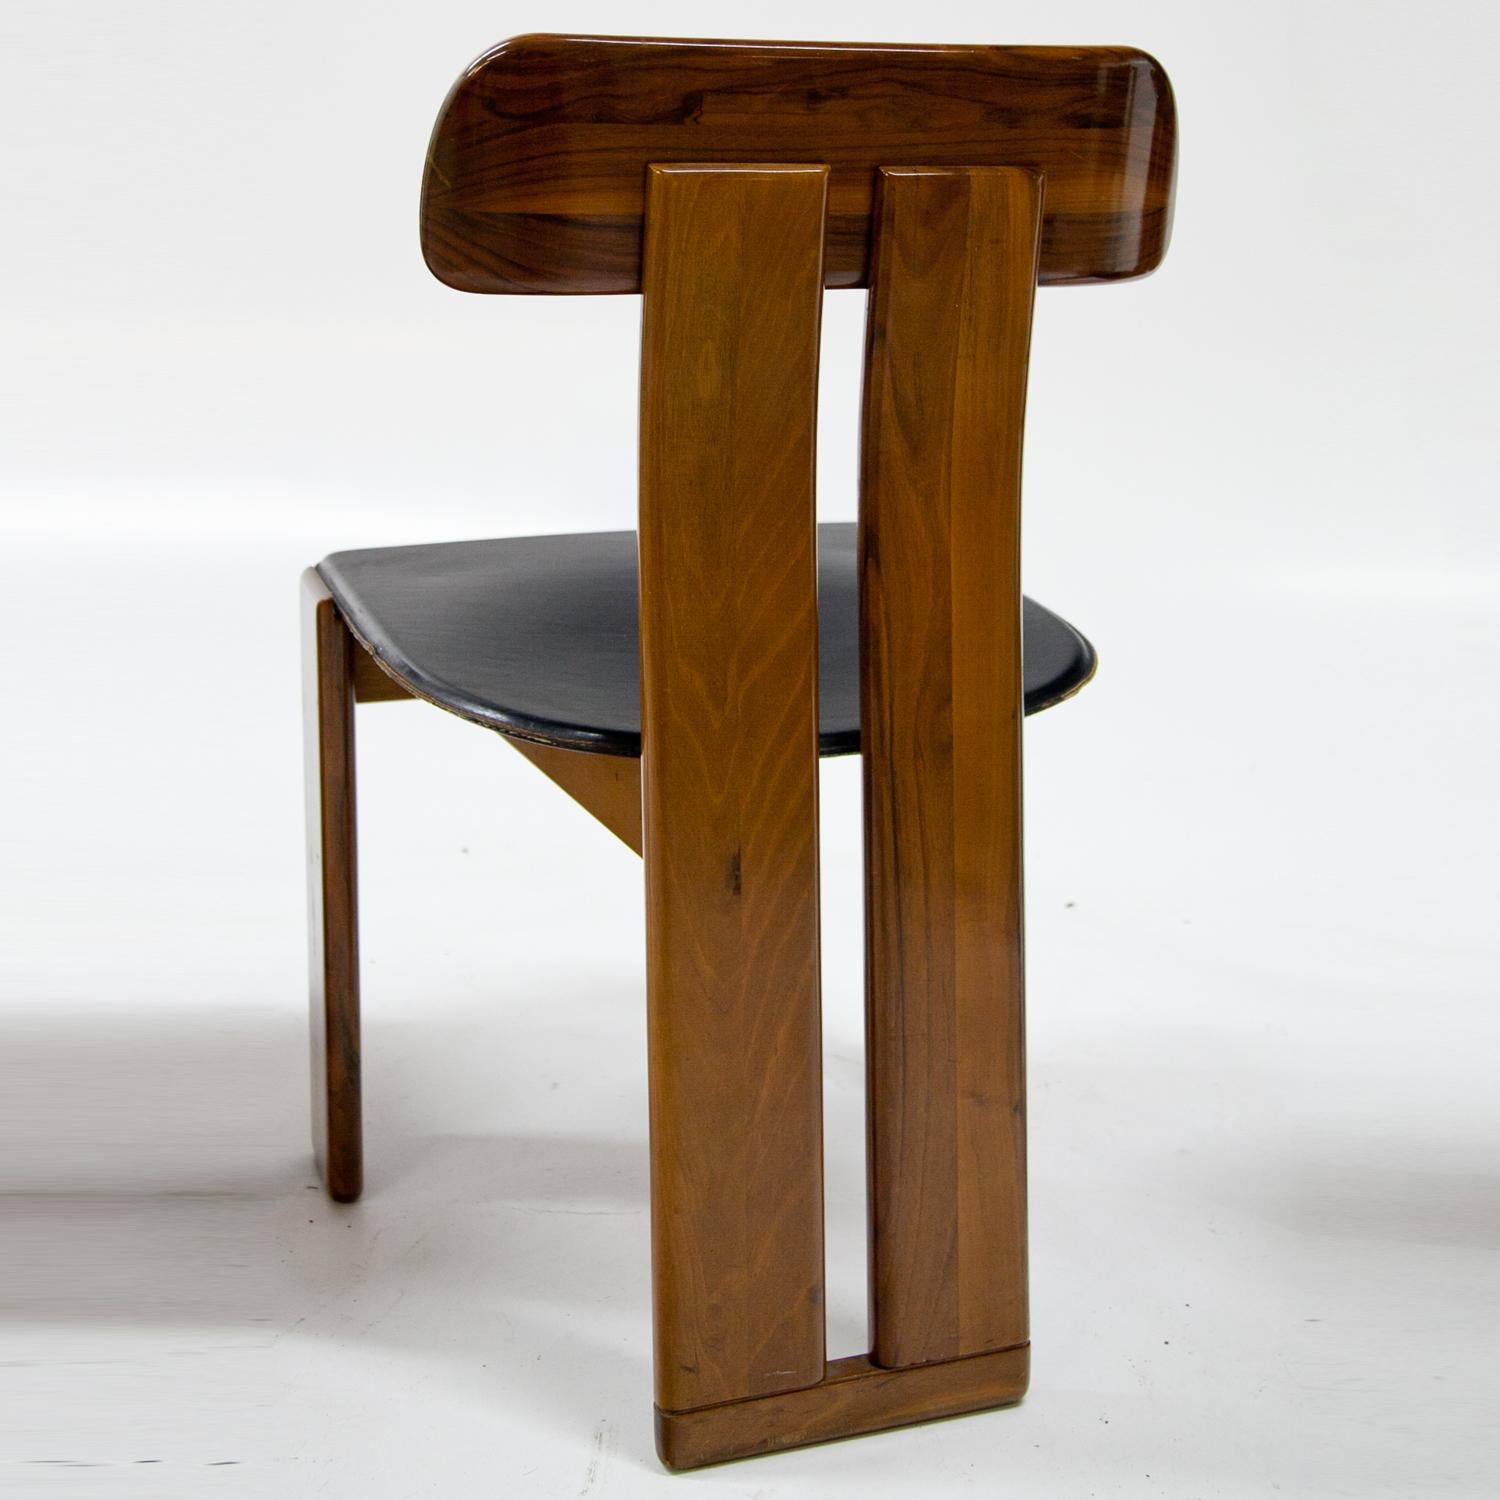 Four Chairs, Attributed to Afra & Tobia Scarpa for Maxalto, Italy, 1970s (Ende des 20. Jahrhunderts)